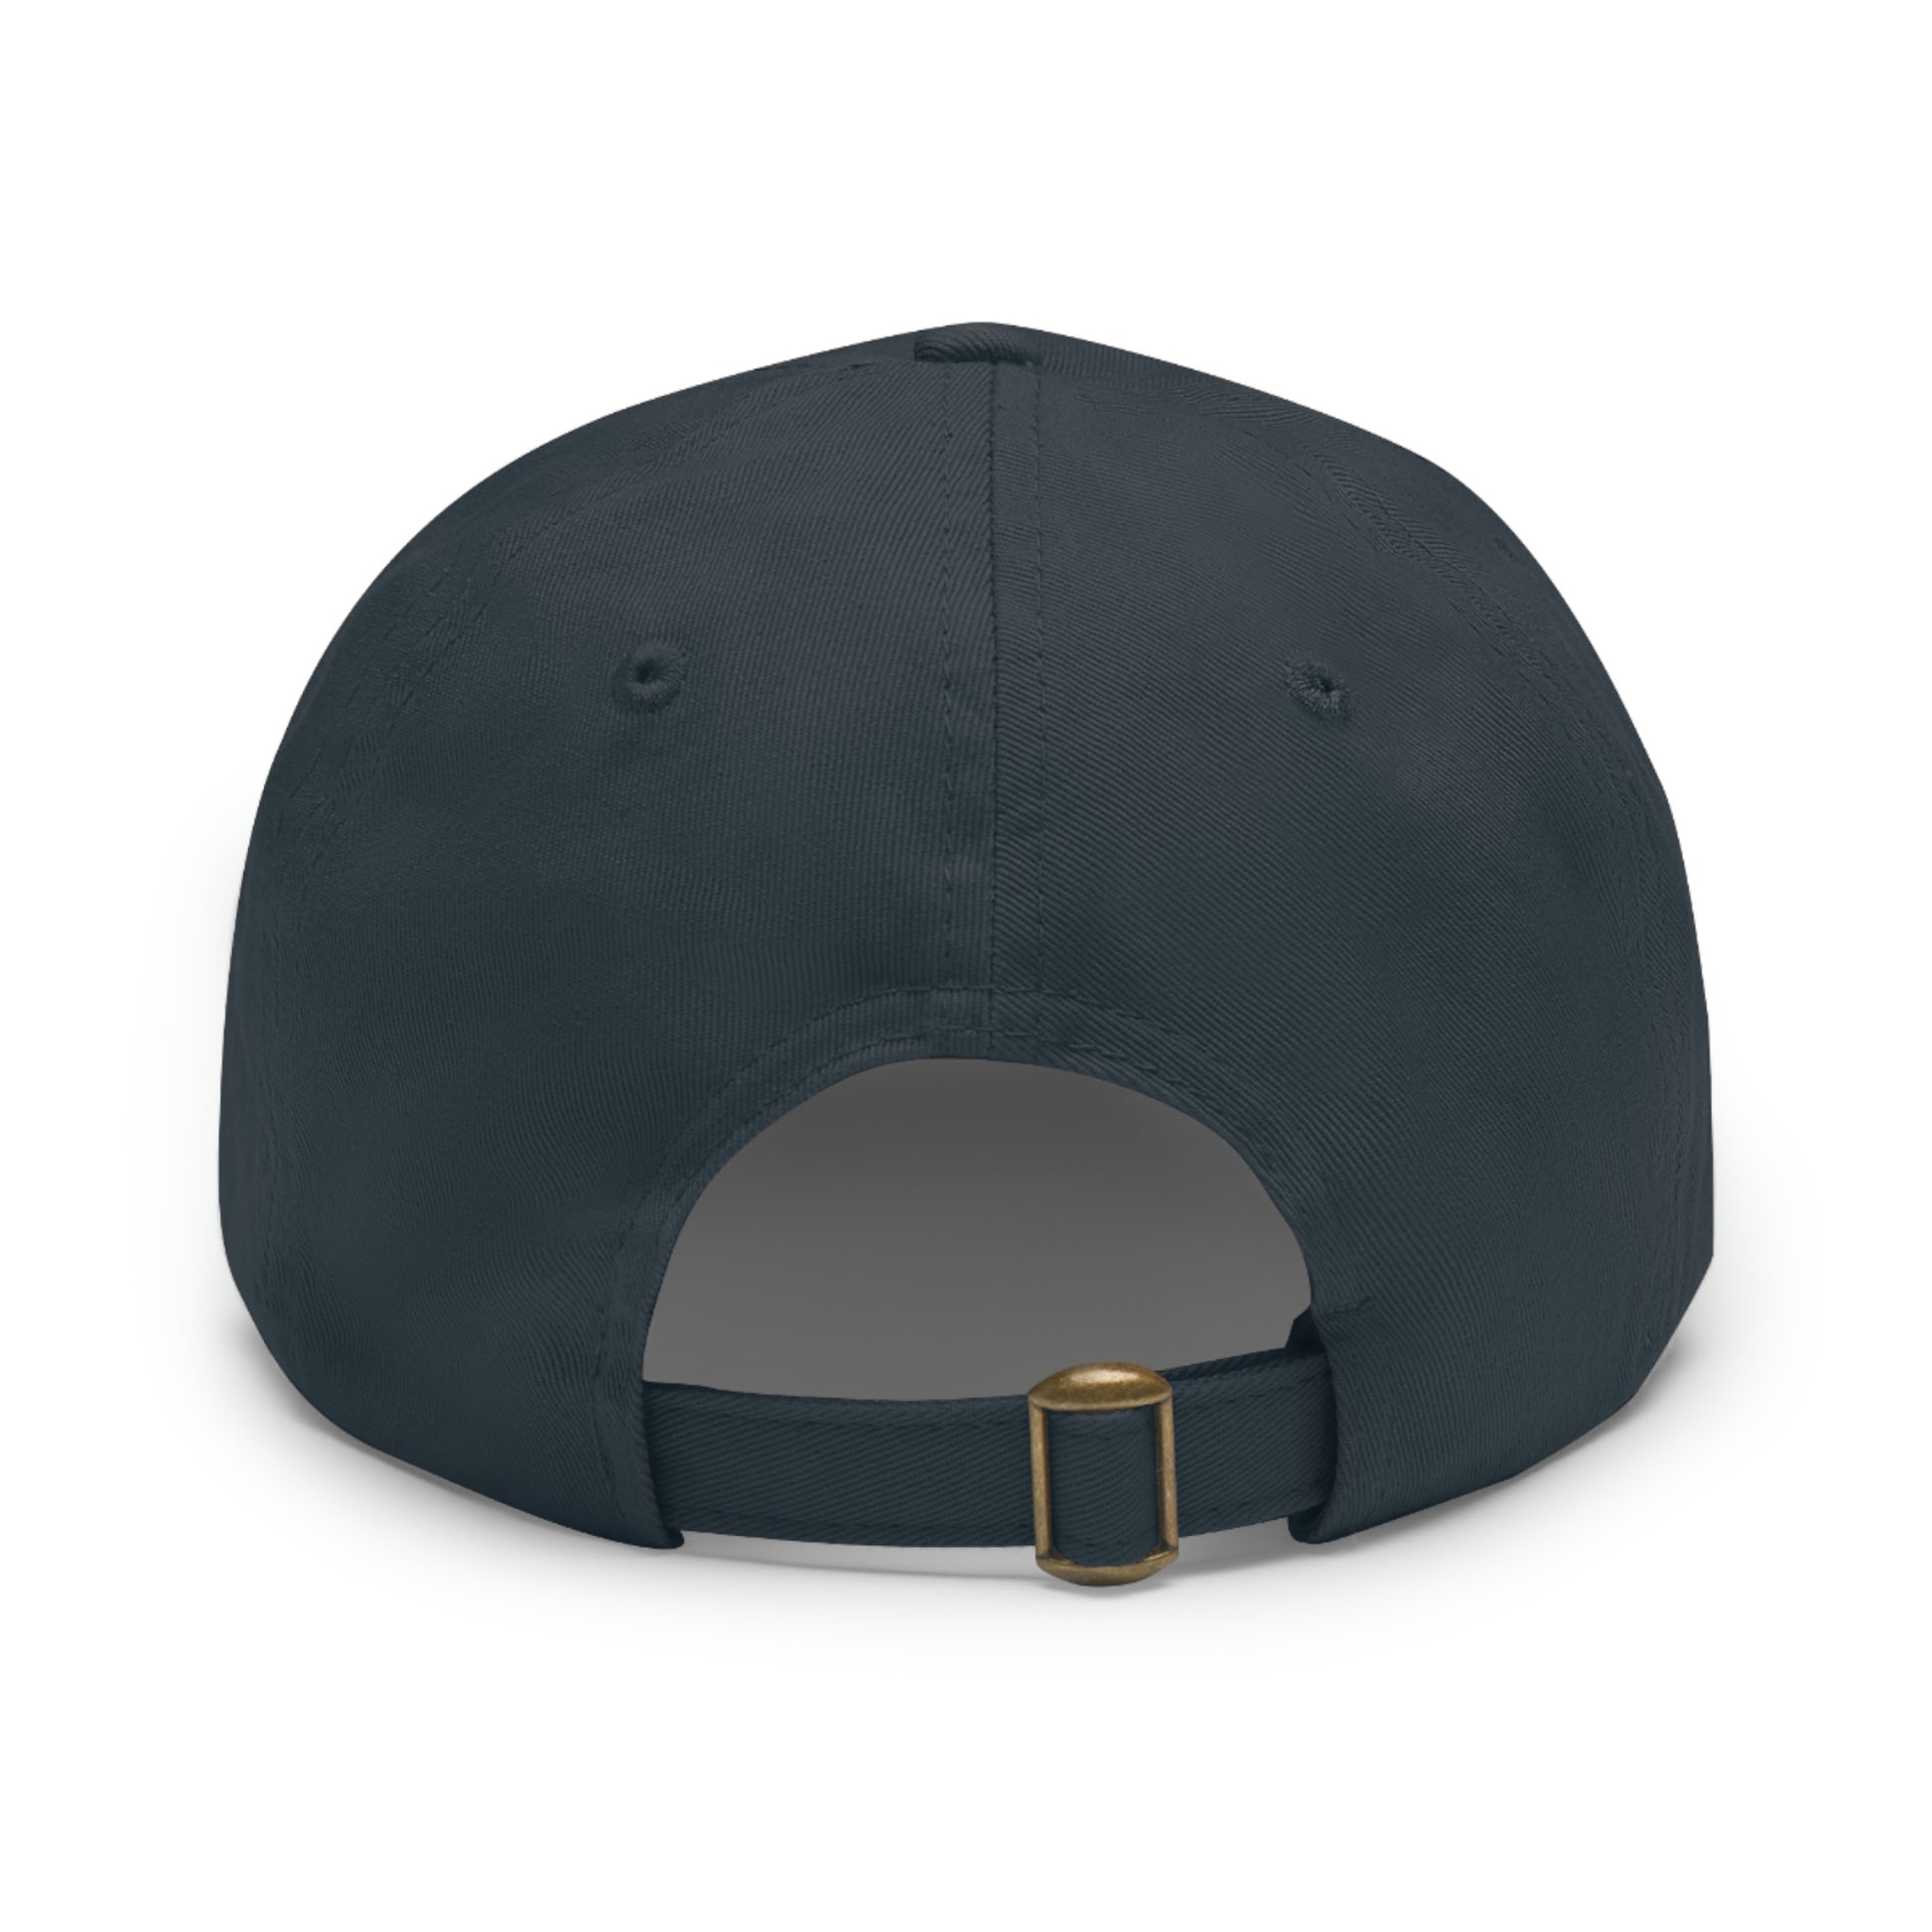 JaxSnap Leather Patch Dad Hat: Classic Comfort Meets Rugged Style for the Ultimate Fishing Cap Printify